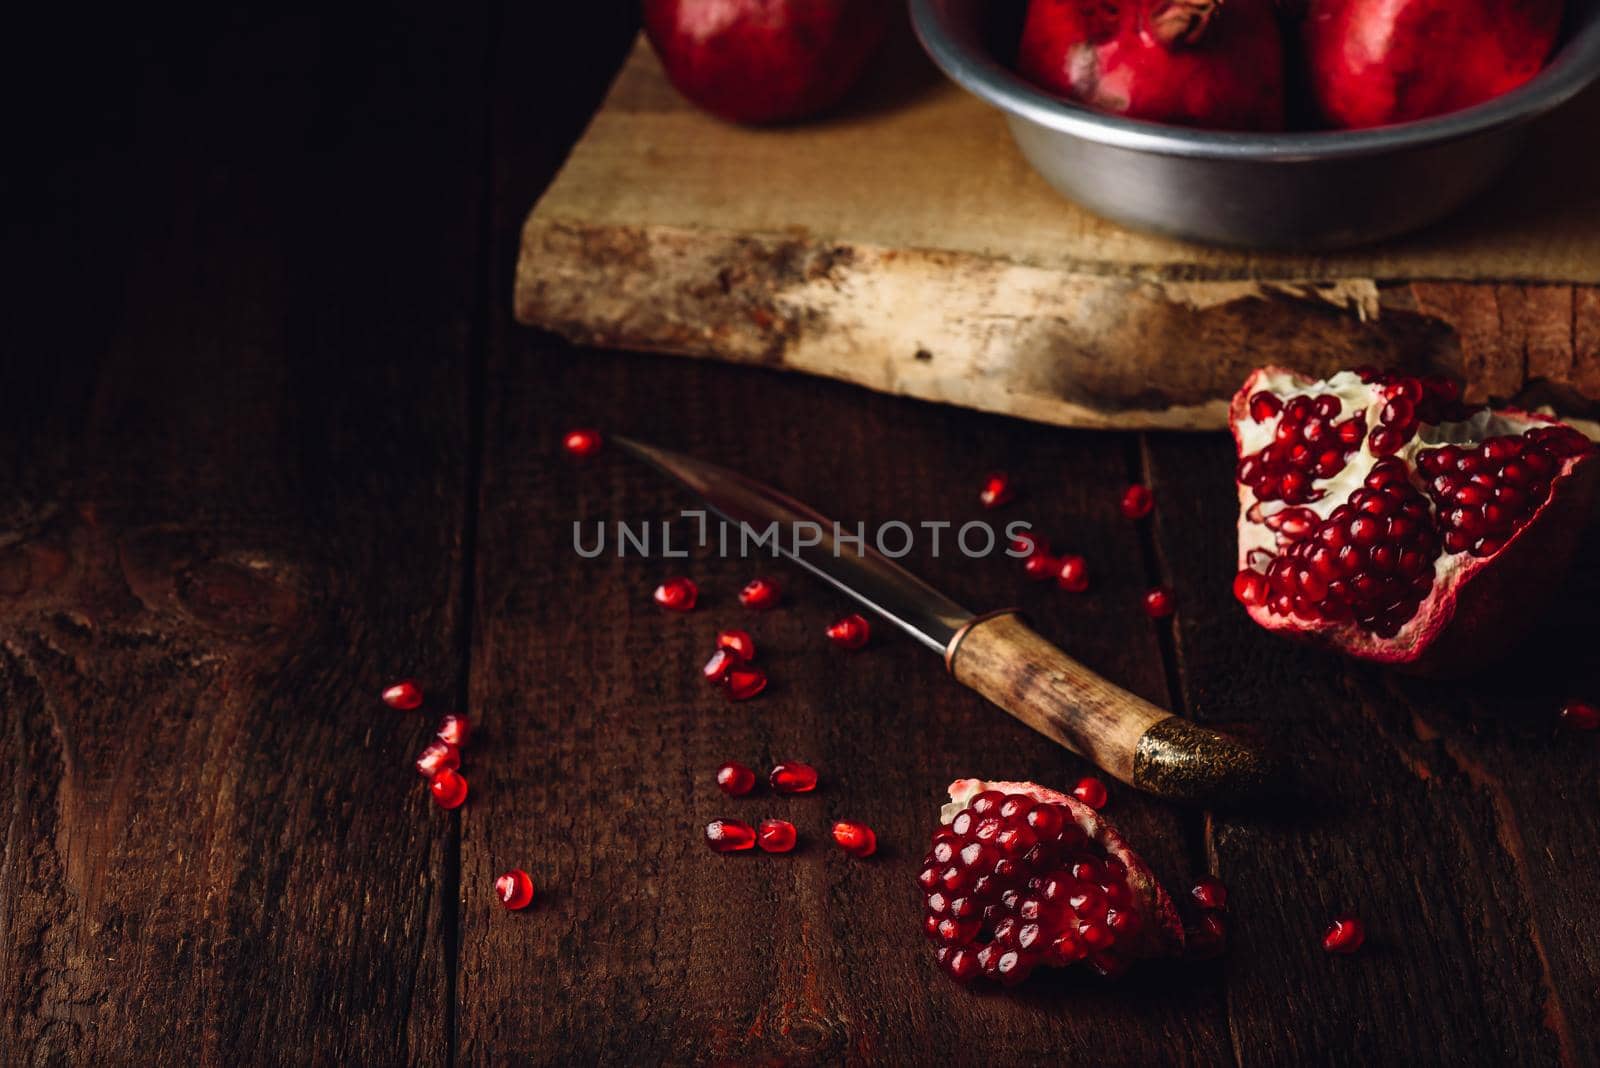 Pomegranate fruits with knife on rustic wooden surface.